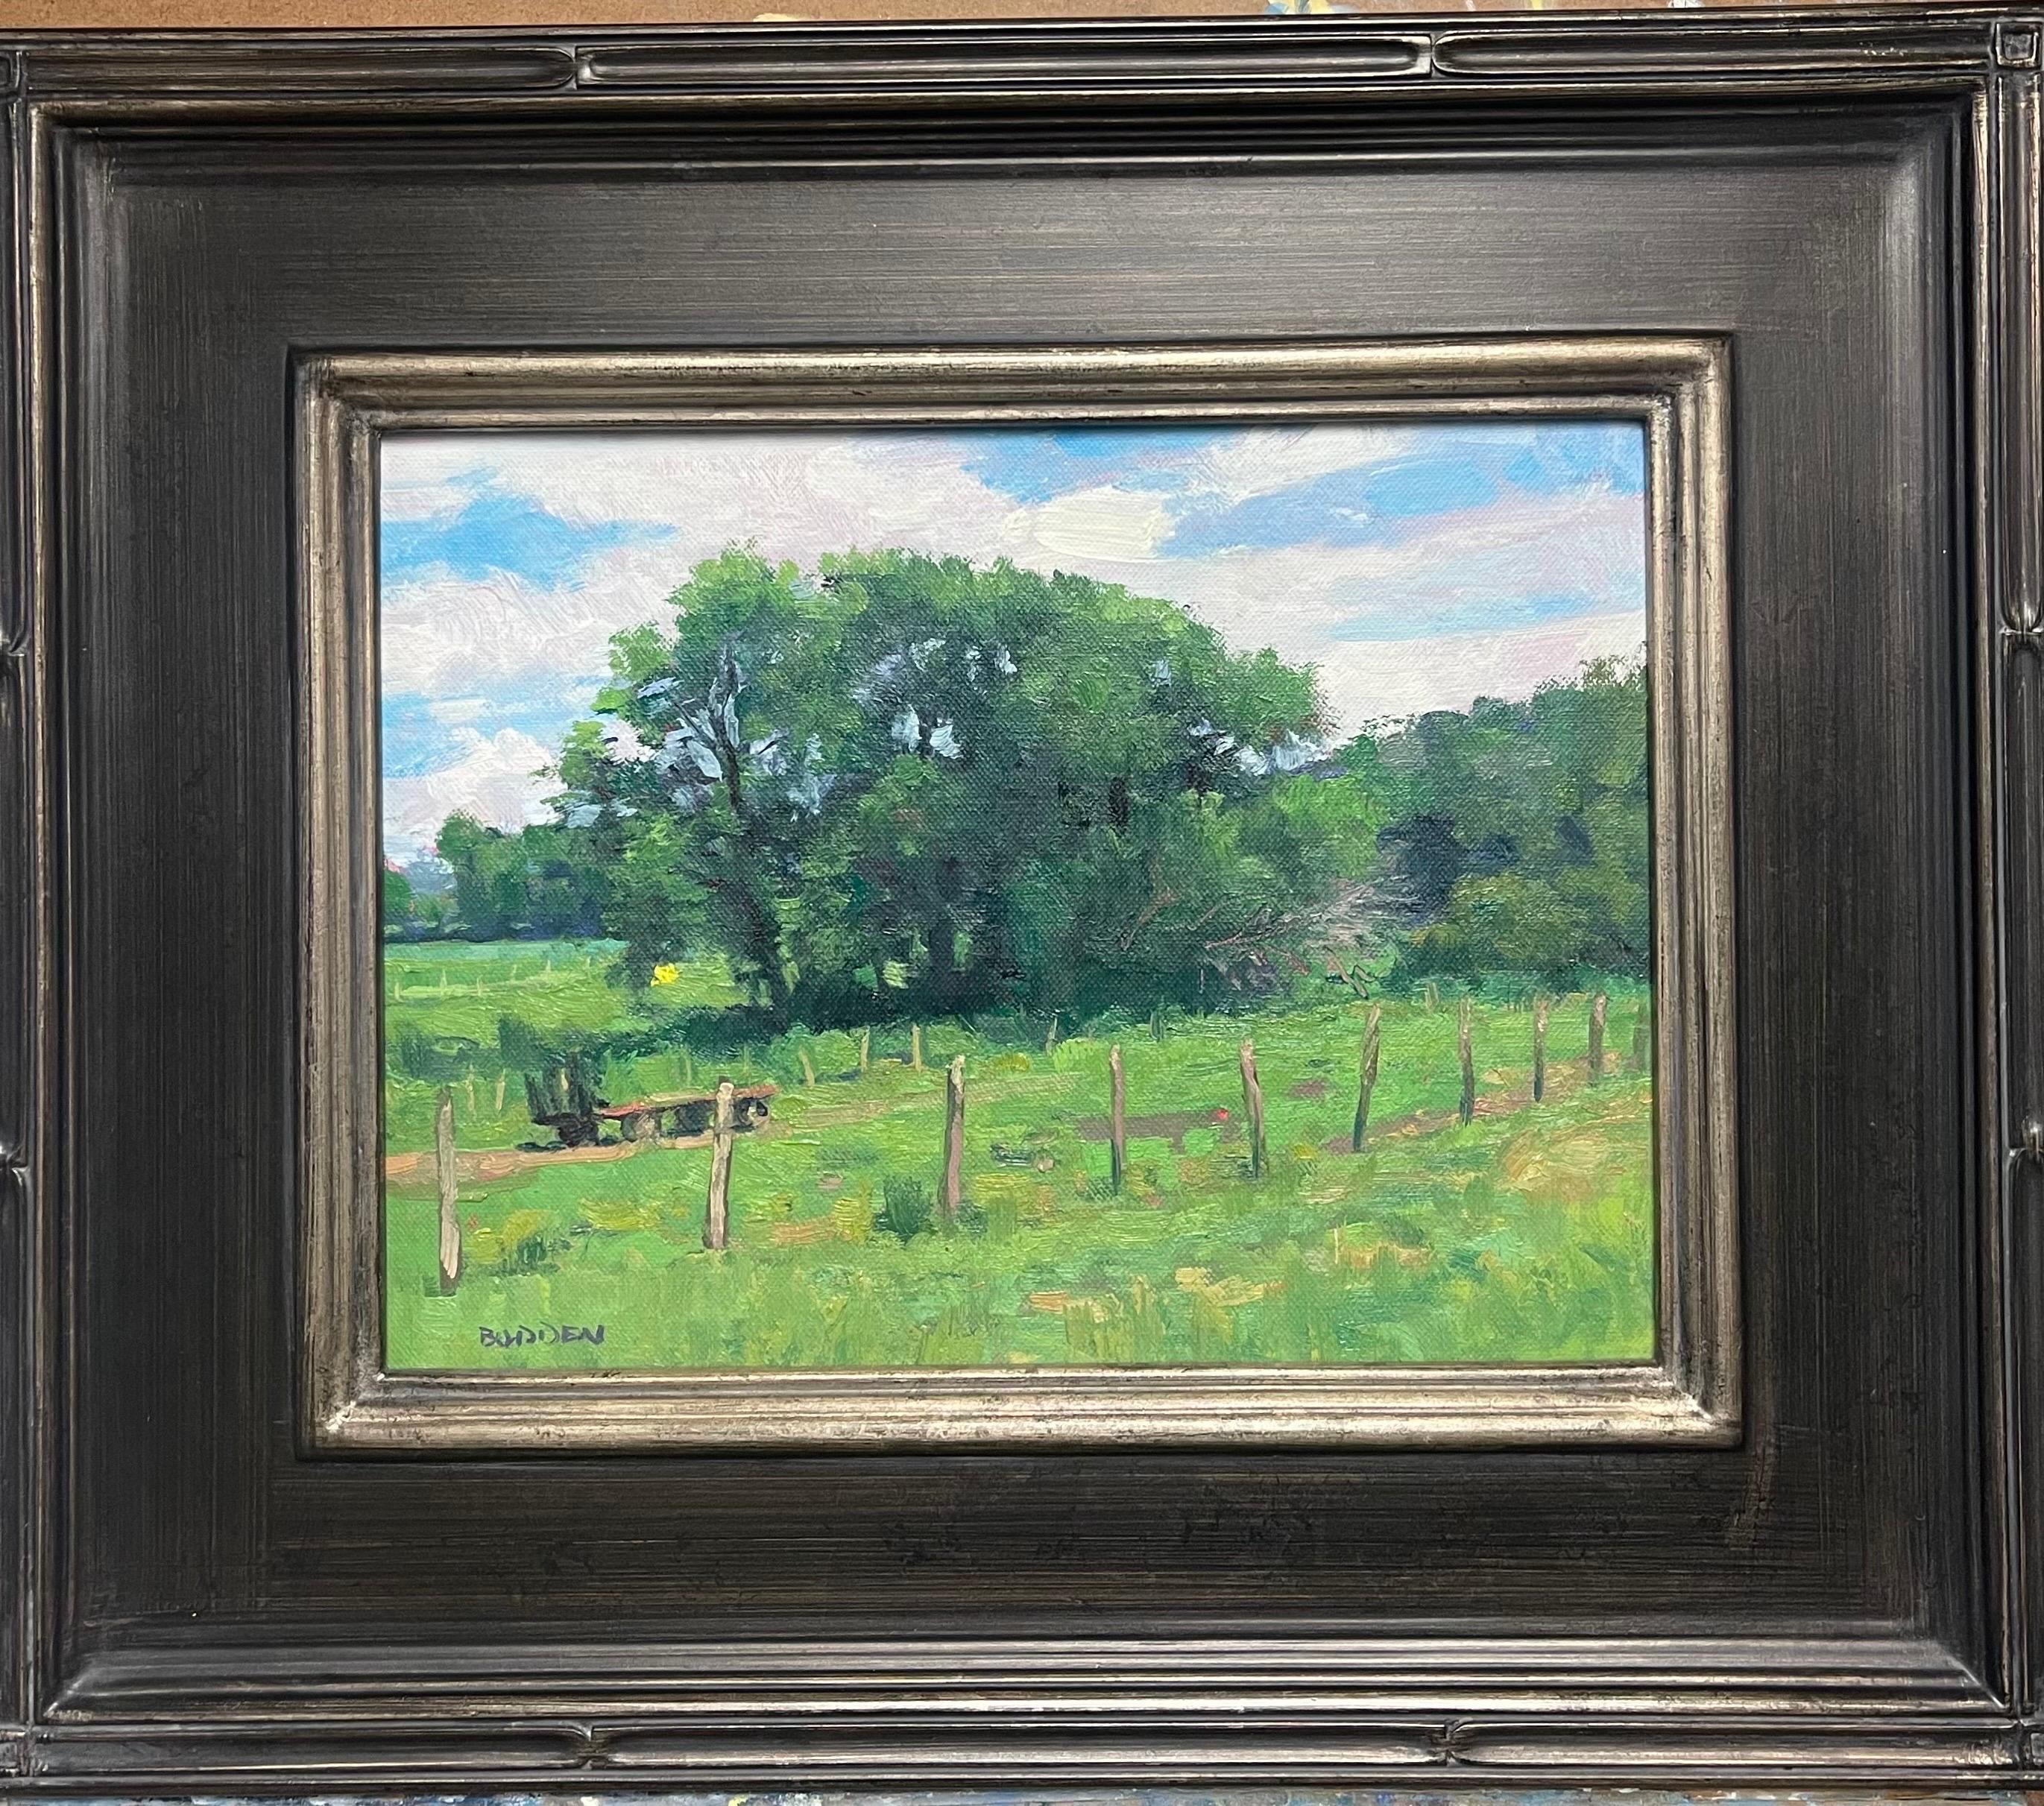 Summertime at Hlubiks
oil/panel
9 x 12 image
is an oil painting on canvas that showcases the beautiful light of a summer day at one of my favorite places to paint in Chesterfield NJ, the Hlubiks farm. This painting was painted en plein air on